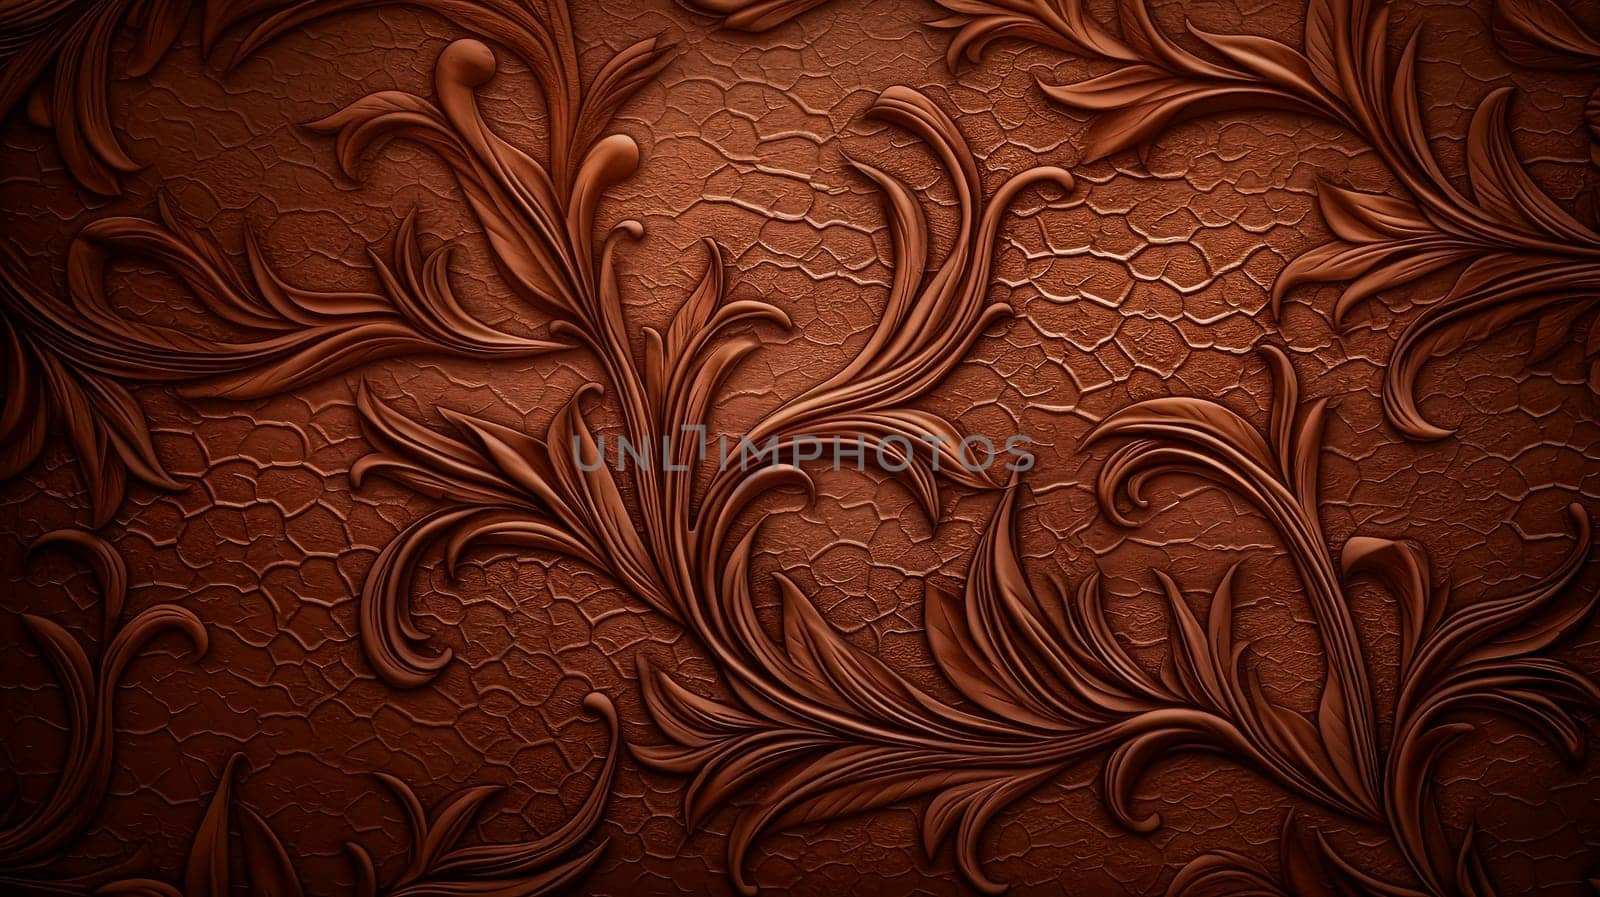 A brown and gold floral wallpaper with a floral design. The wallpaper is ornate and has a warm, inviting feel